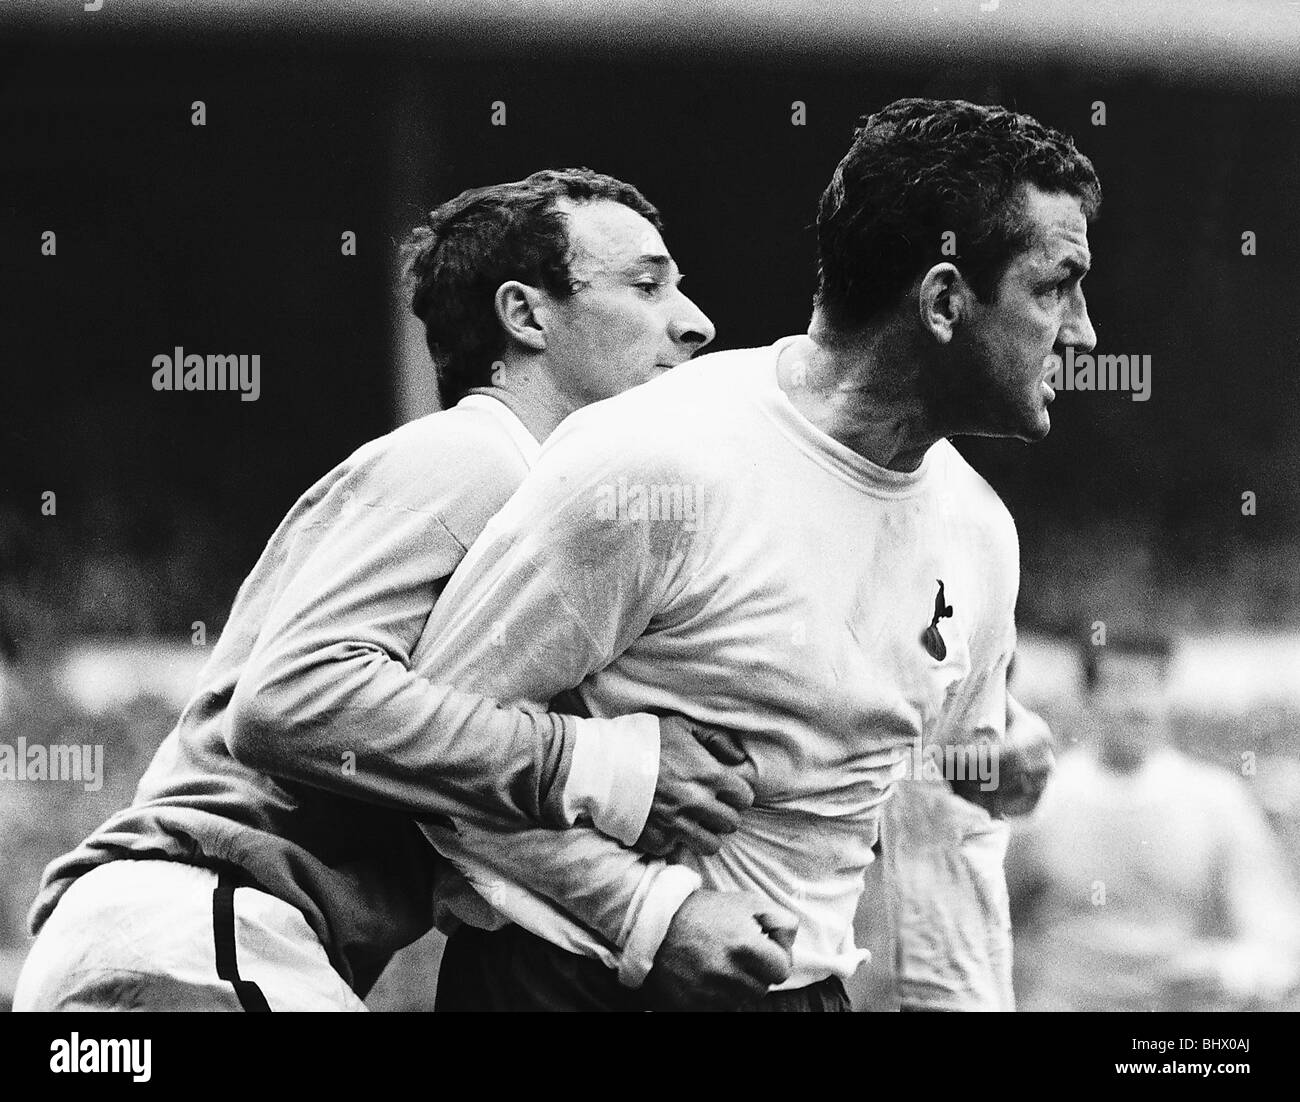 Dave Mackay of Spurs after a clash with Mike Summerbee of Manchester City May 1968 Stock Photo